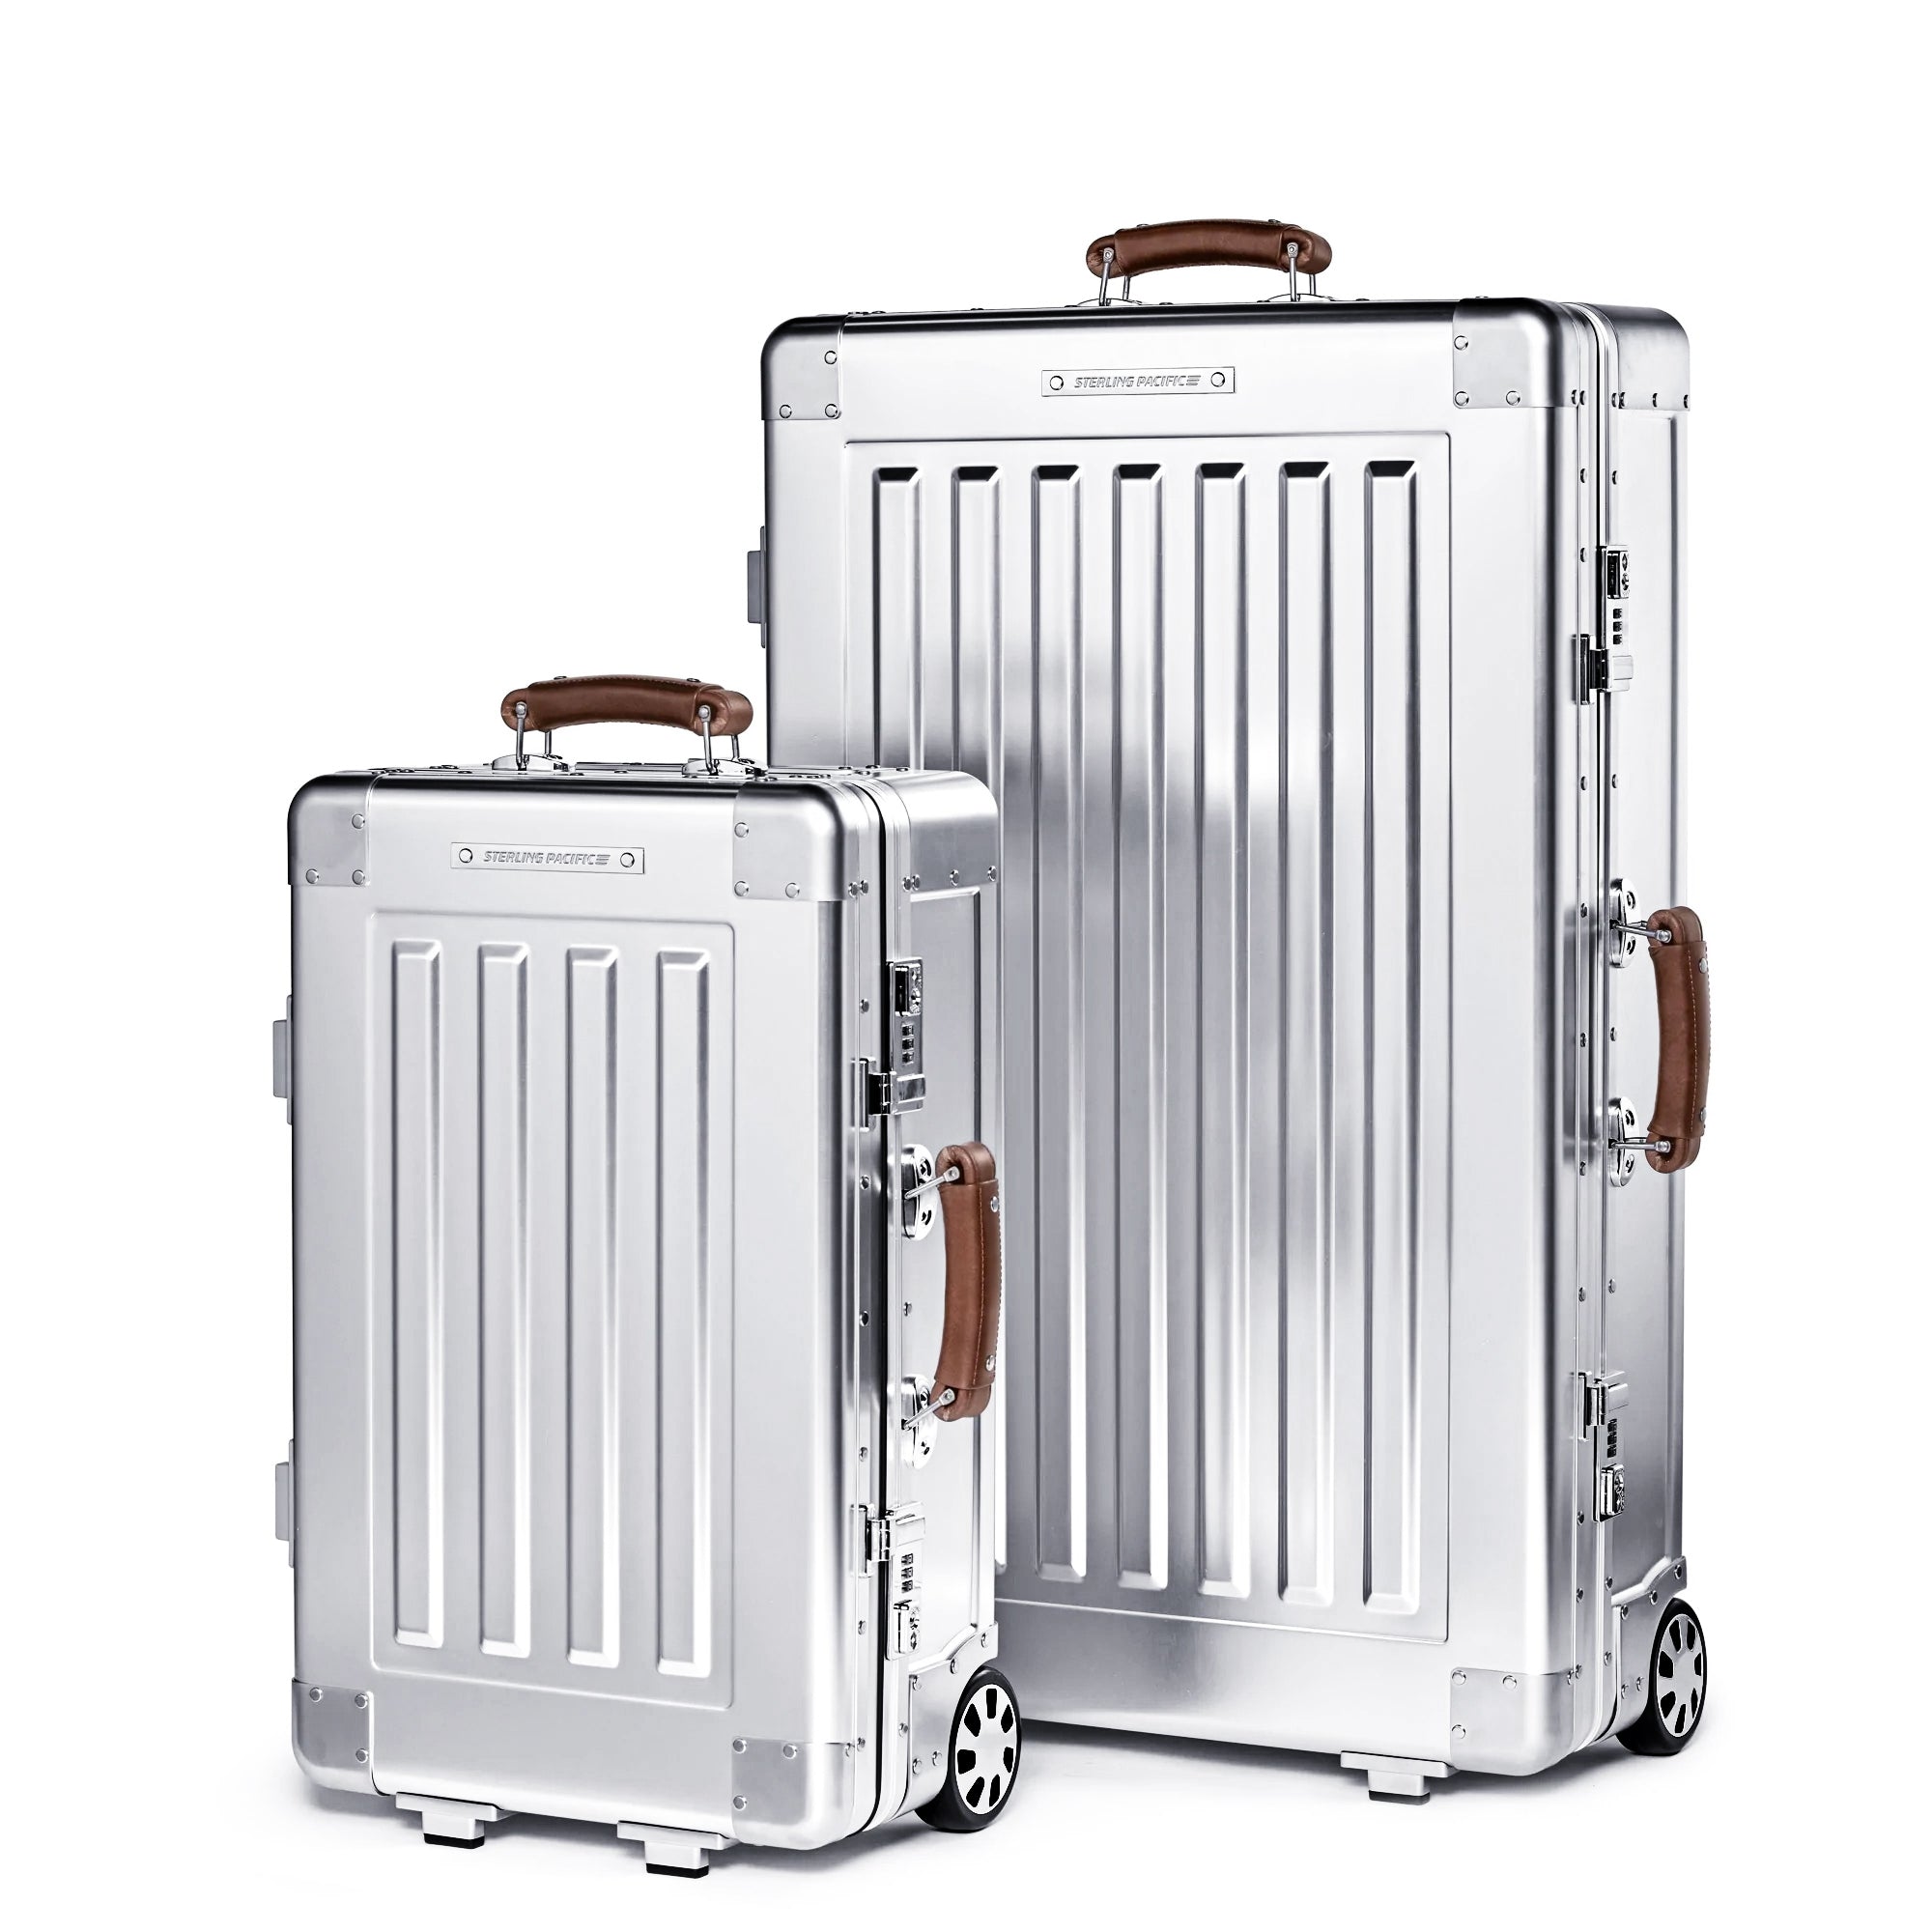 Sterling Pacific Luggage – 35L Cabin Travel Case (Carry-on)